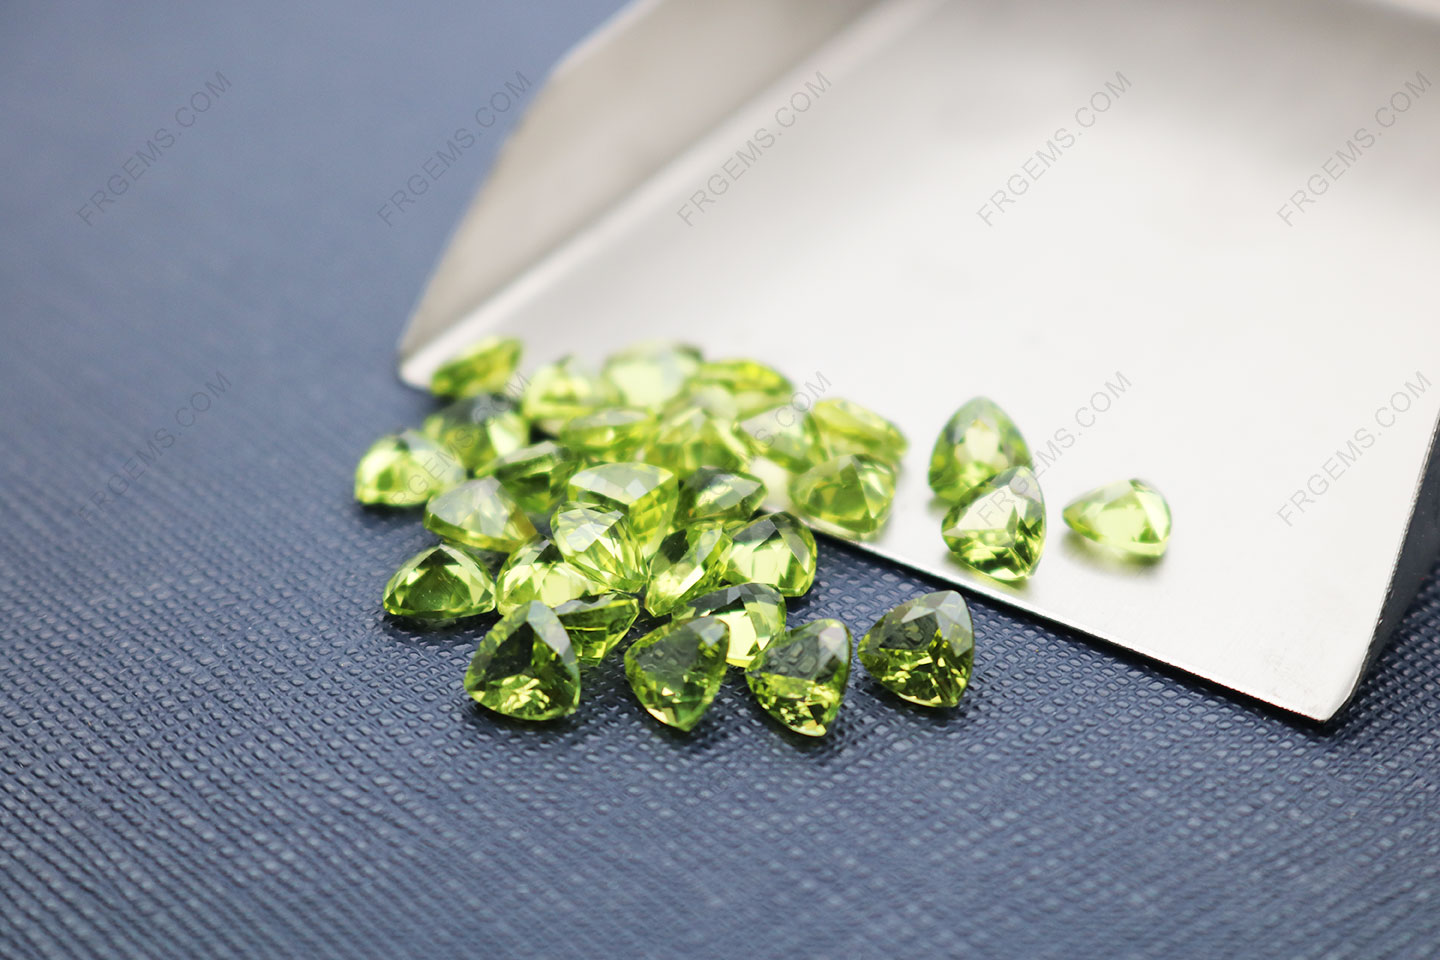 Natural genuine Peridot Color Trillion faceted 6x6mm Gemstones wholesale from China Supplier